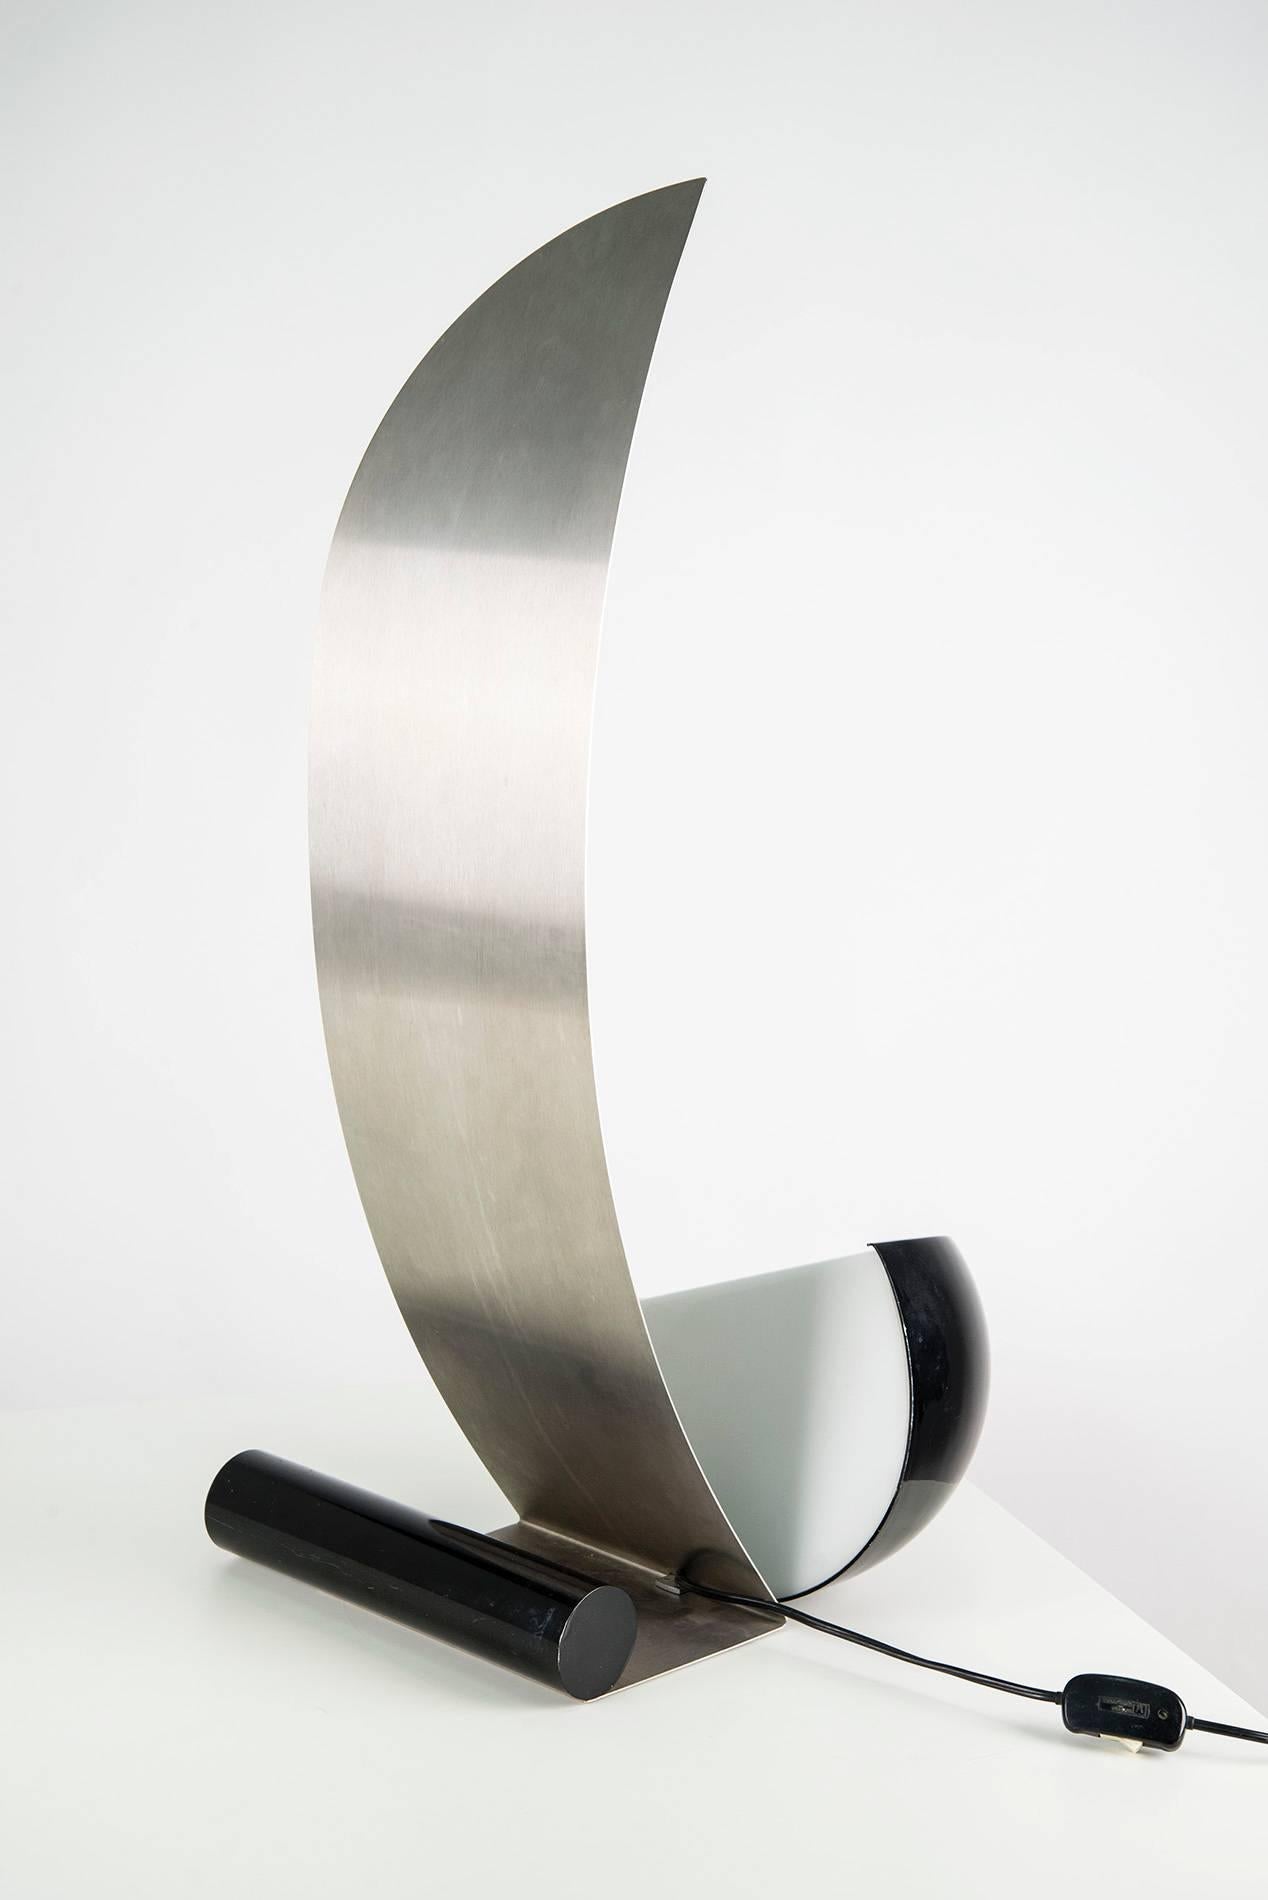 Large sculptural table lamp in the manner of Gigi Capriolo, manufactured in Italy in the 1970s. Lacquered aluminum and plexiglass shade, steel structure.